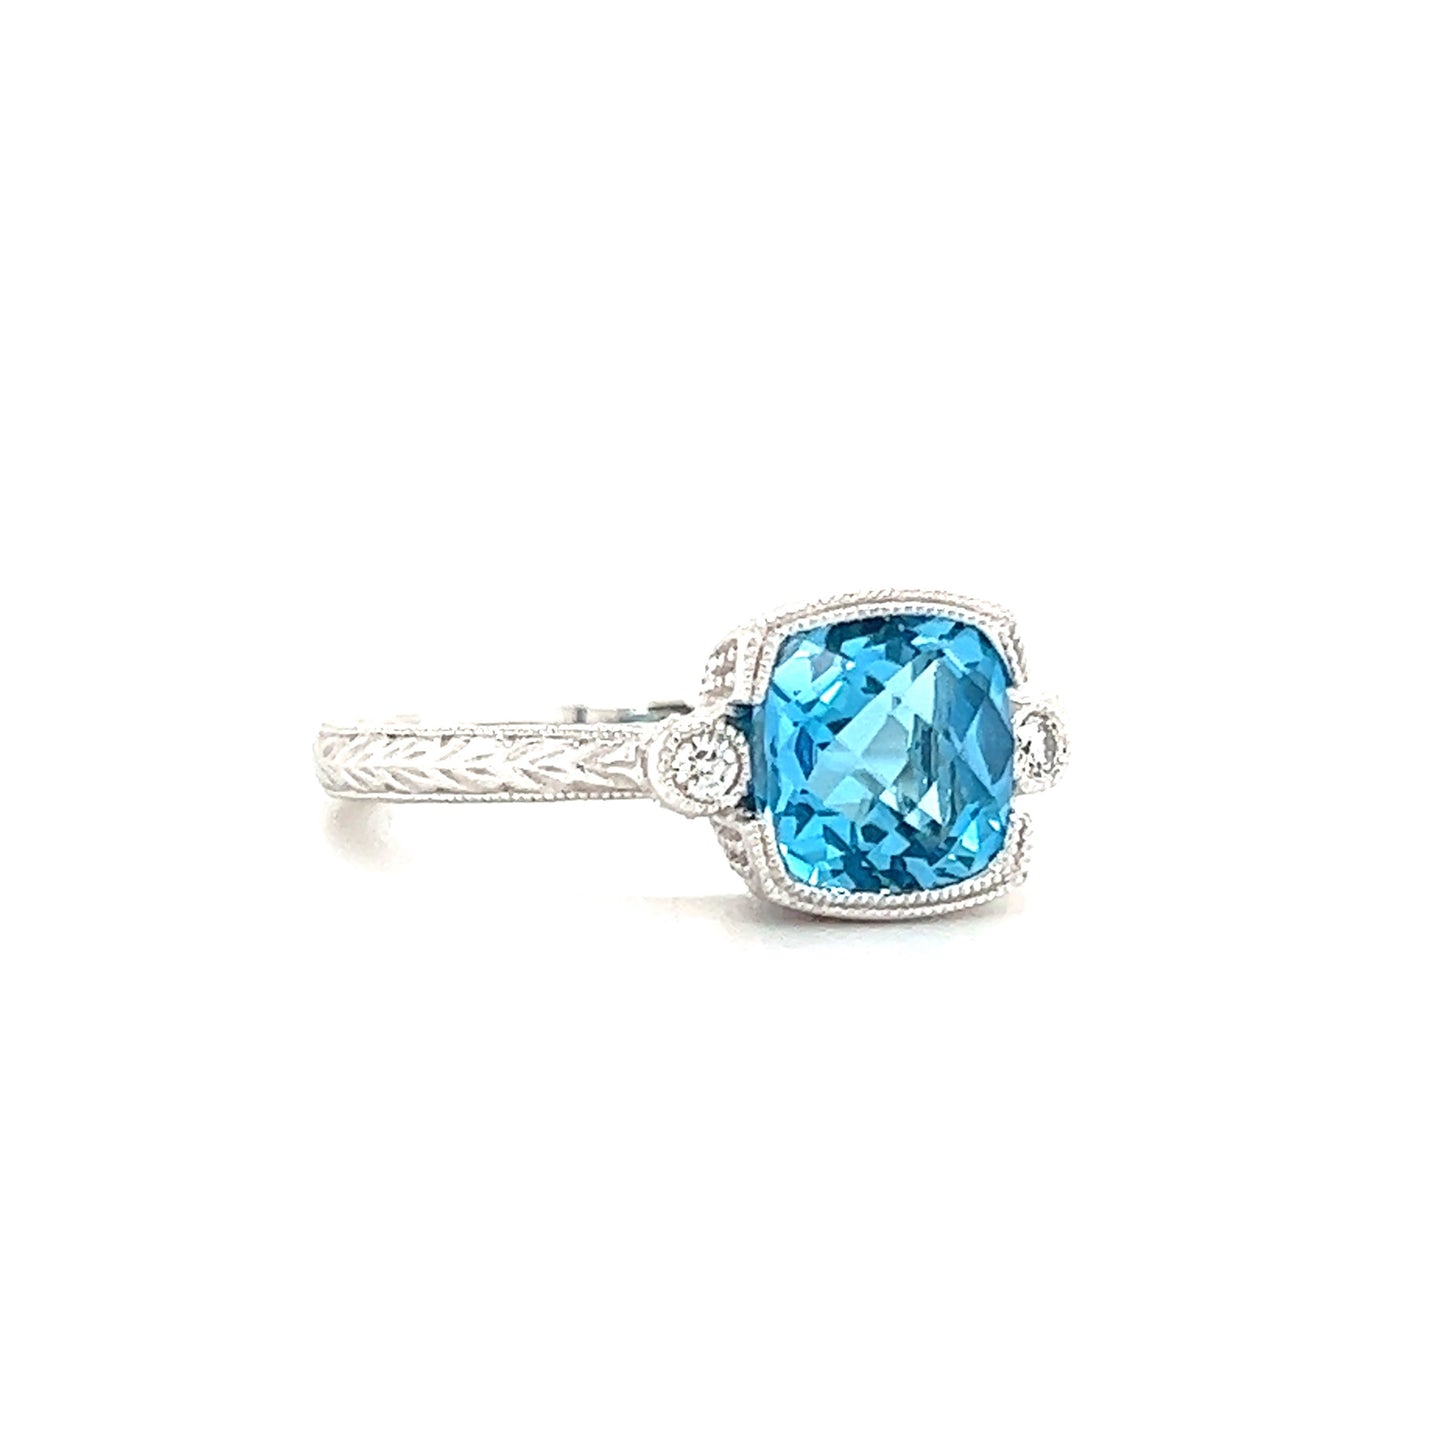 Blue Topaz Ring with Side Diamonds and Engraving in 14k White Gold Right Side View